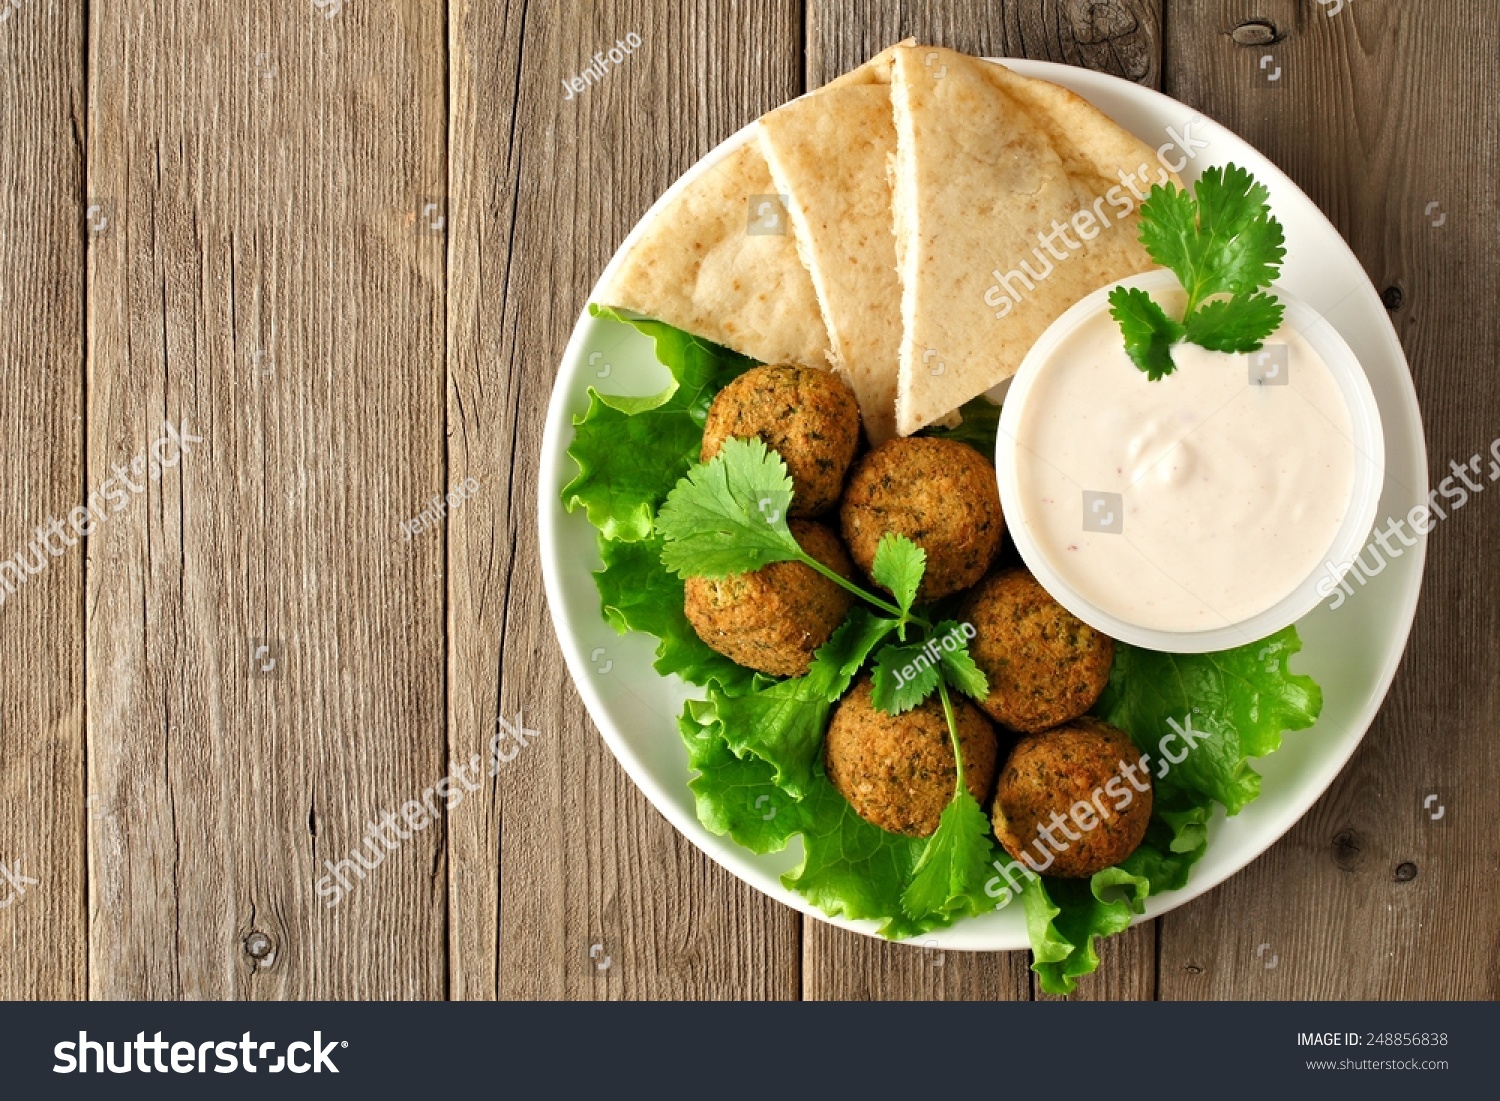 Plate of falafel with pita bread and tzatziki sauce on wooden table. View from above #248856838